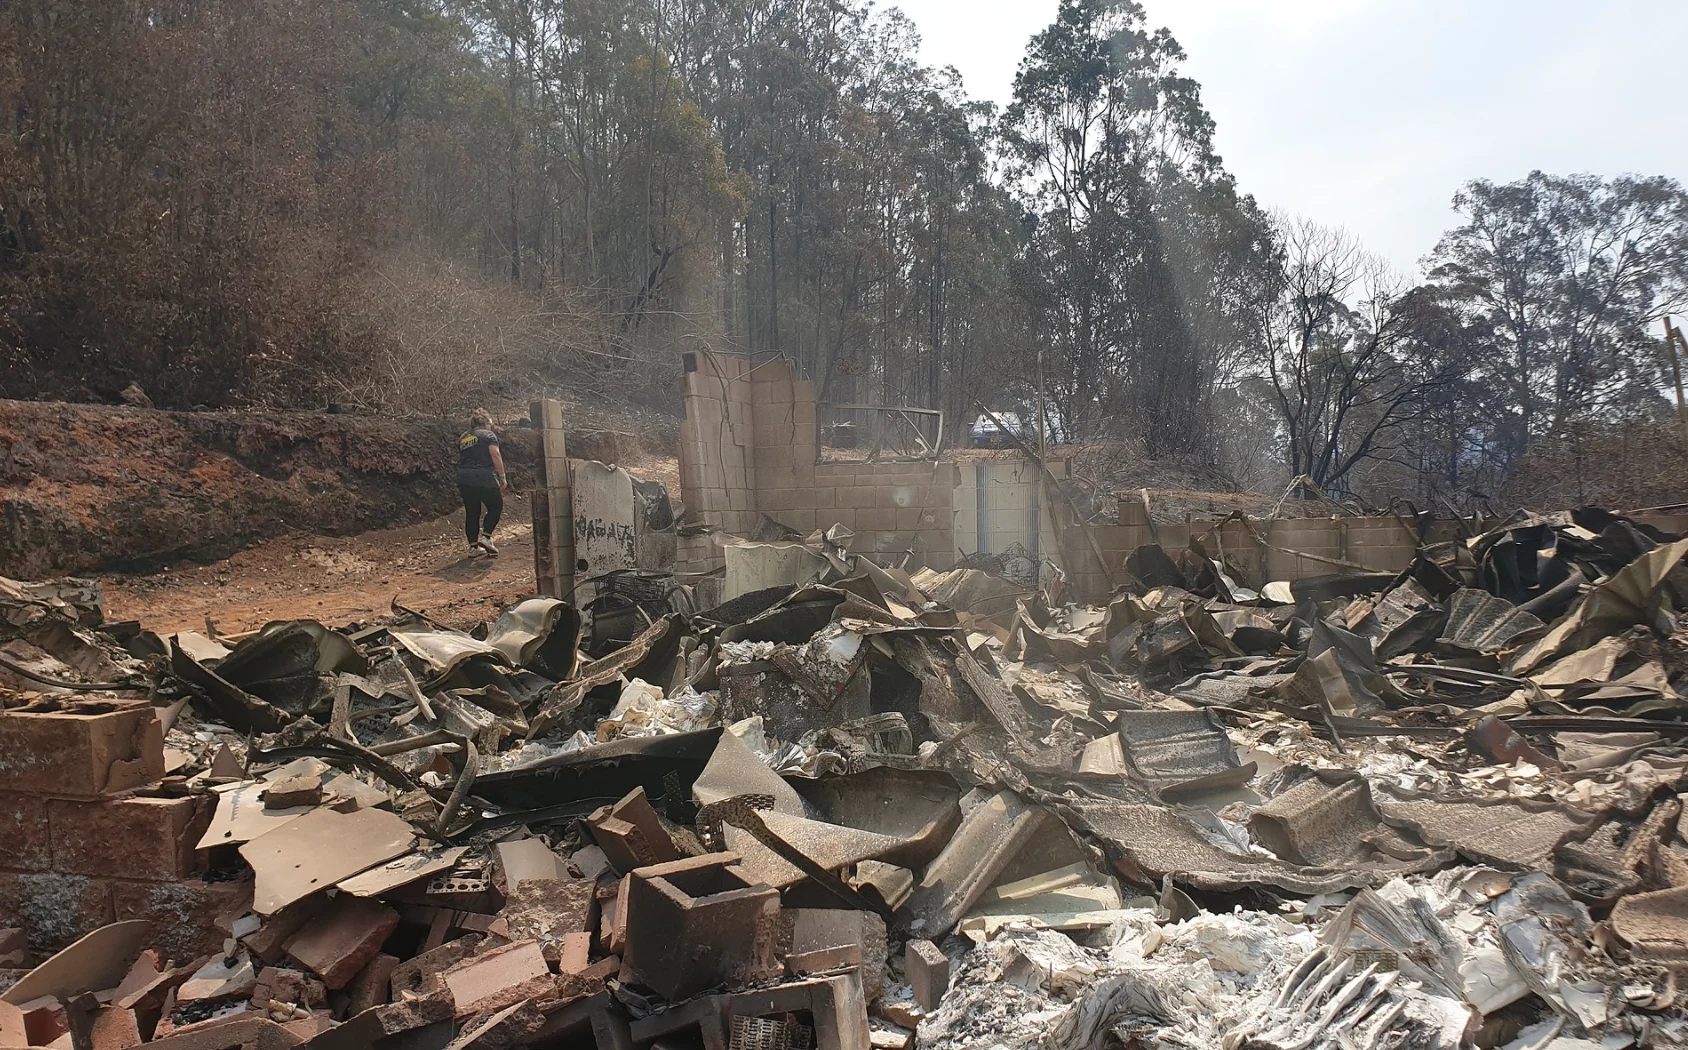 House destroyed in Hillville, NSW on 12 November 2019